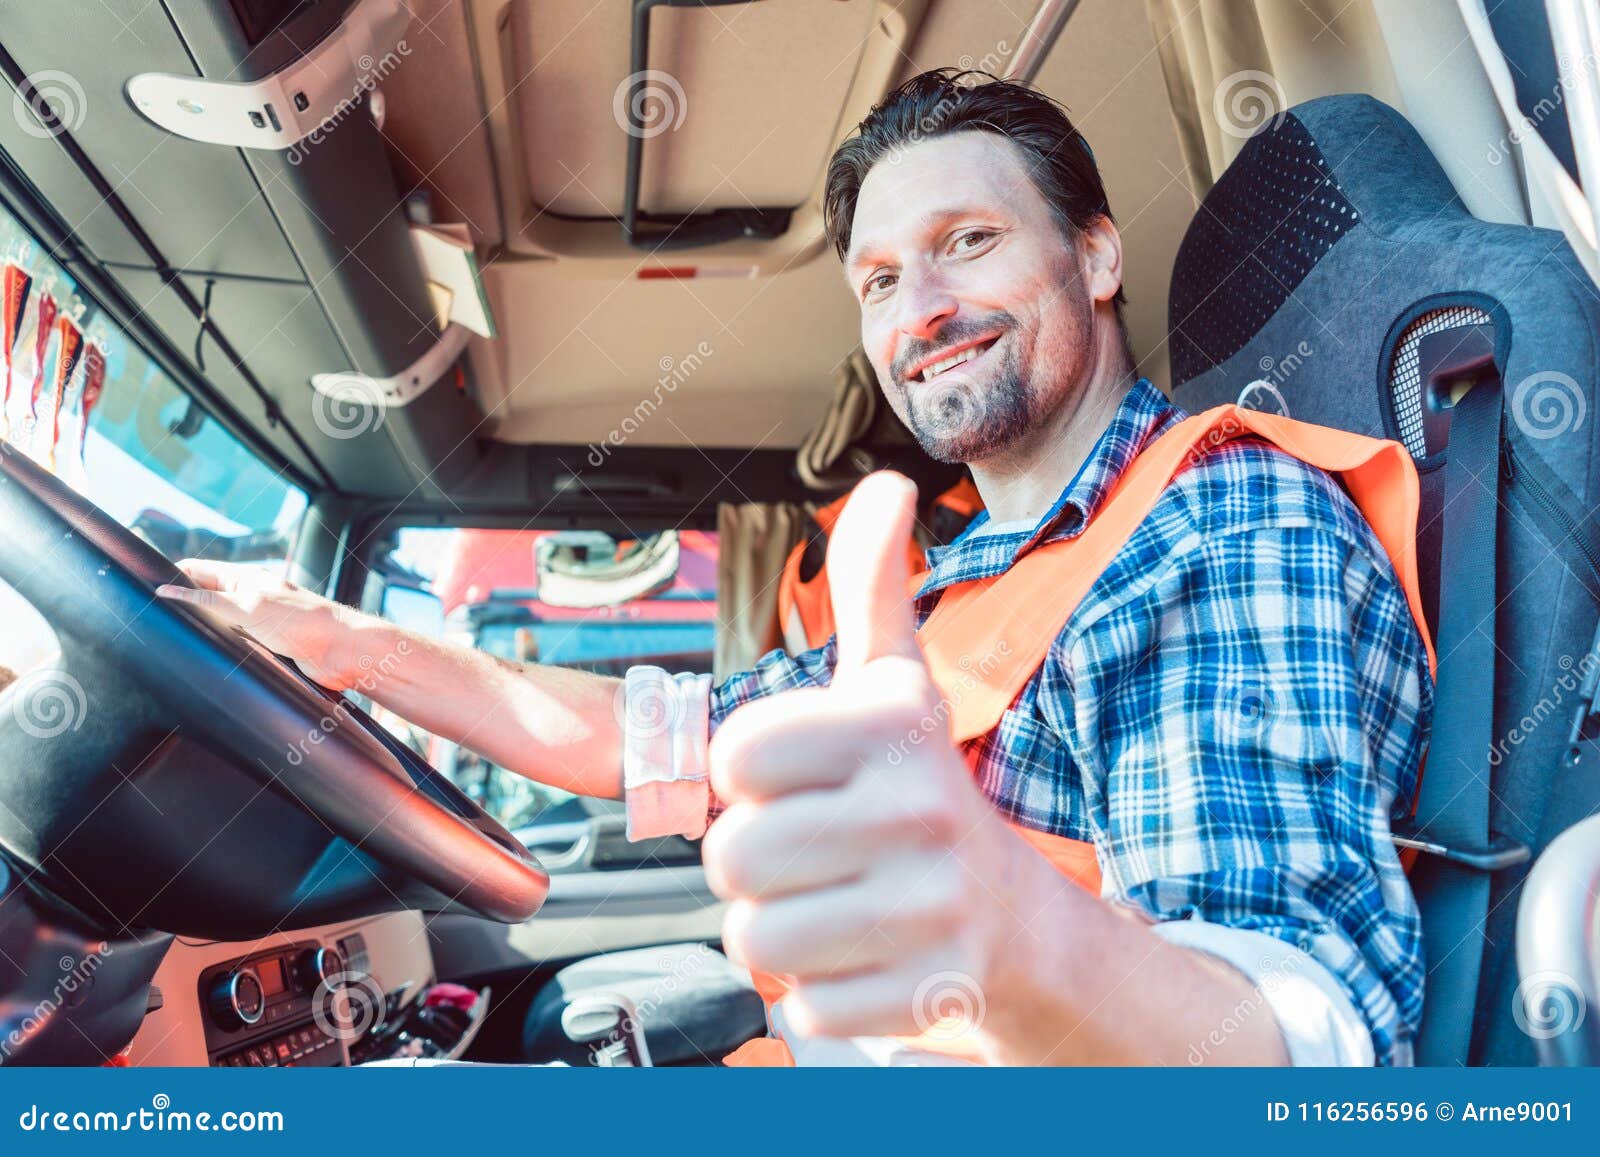 truck driver sitting in cabin giving thumbs-up